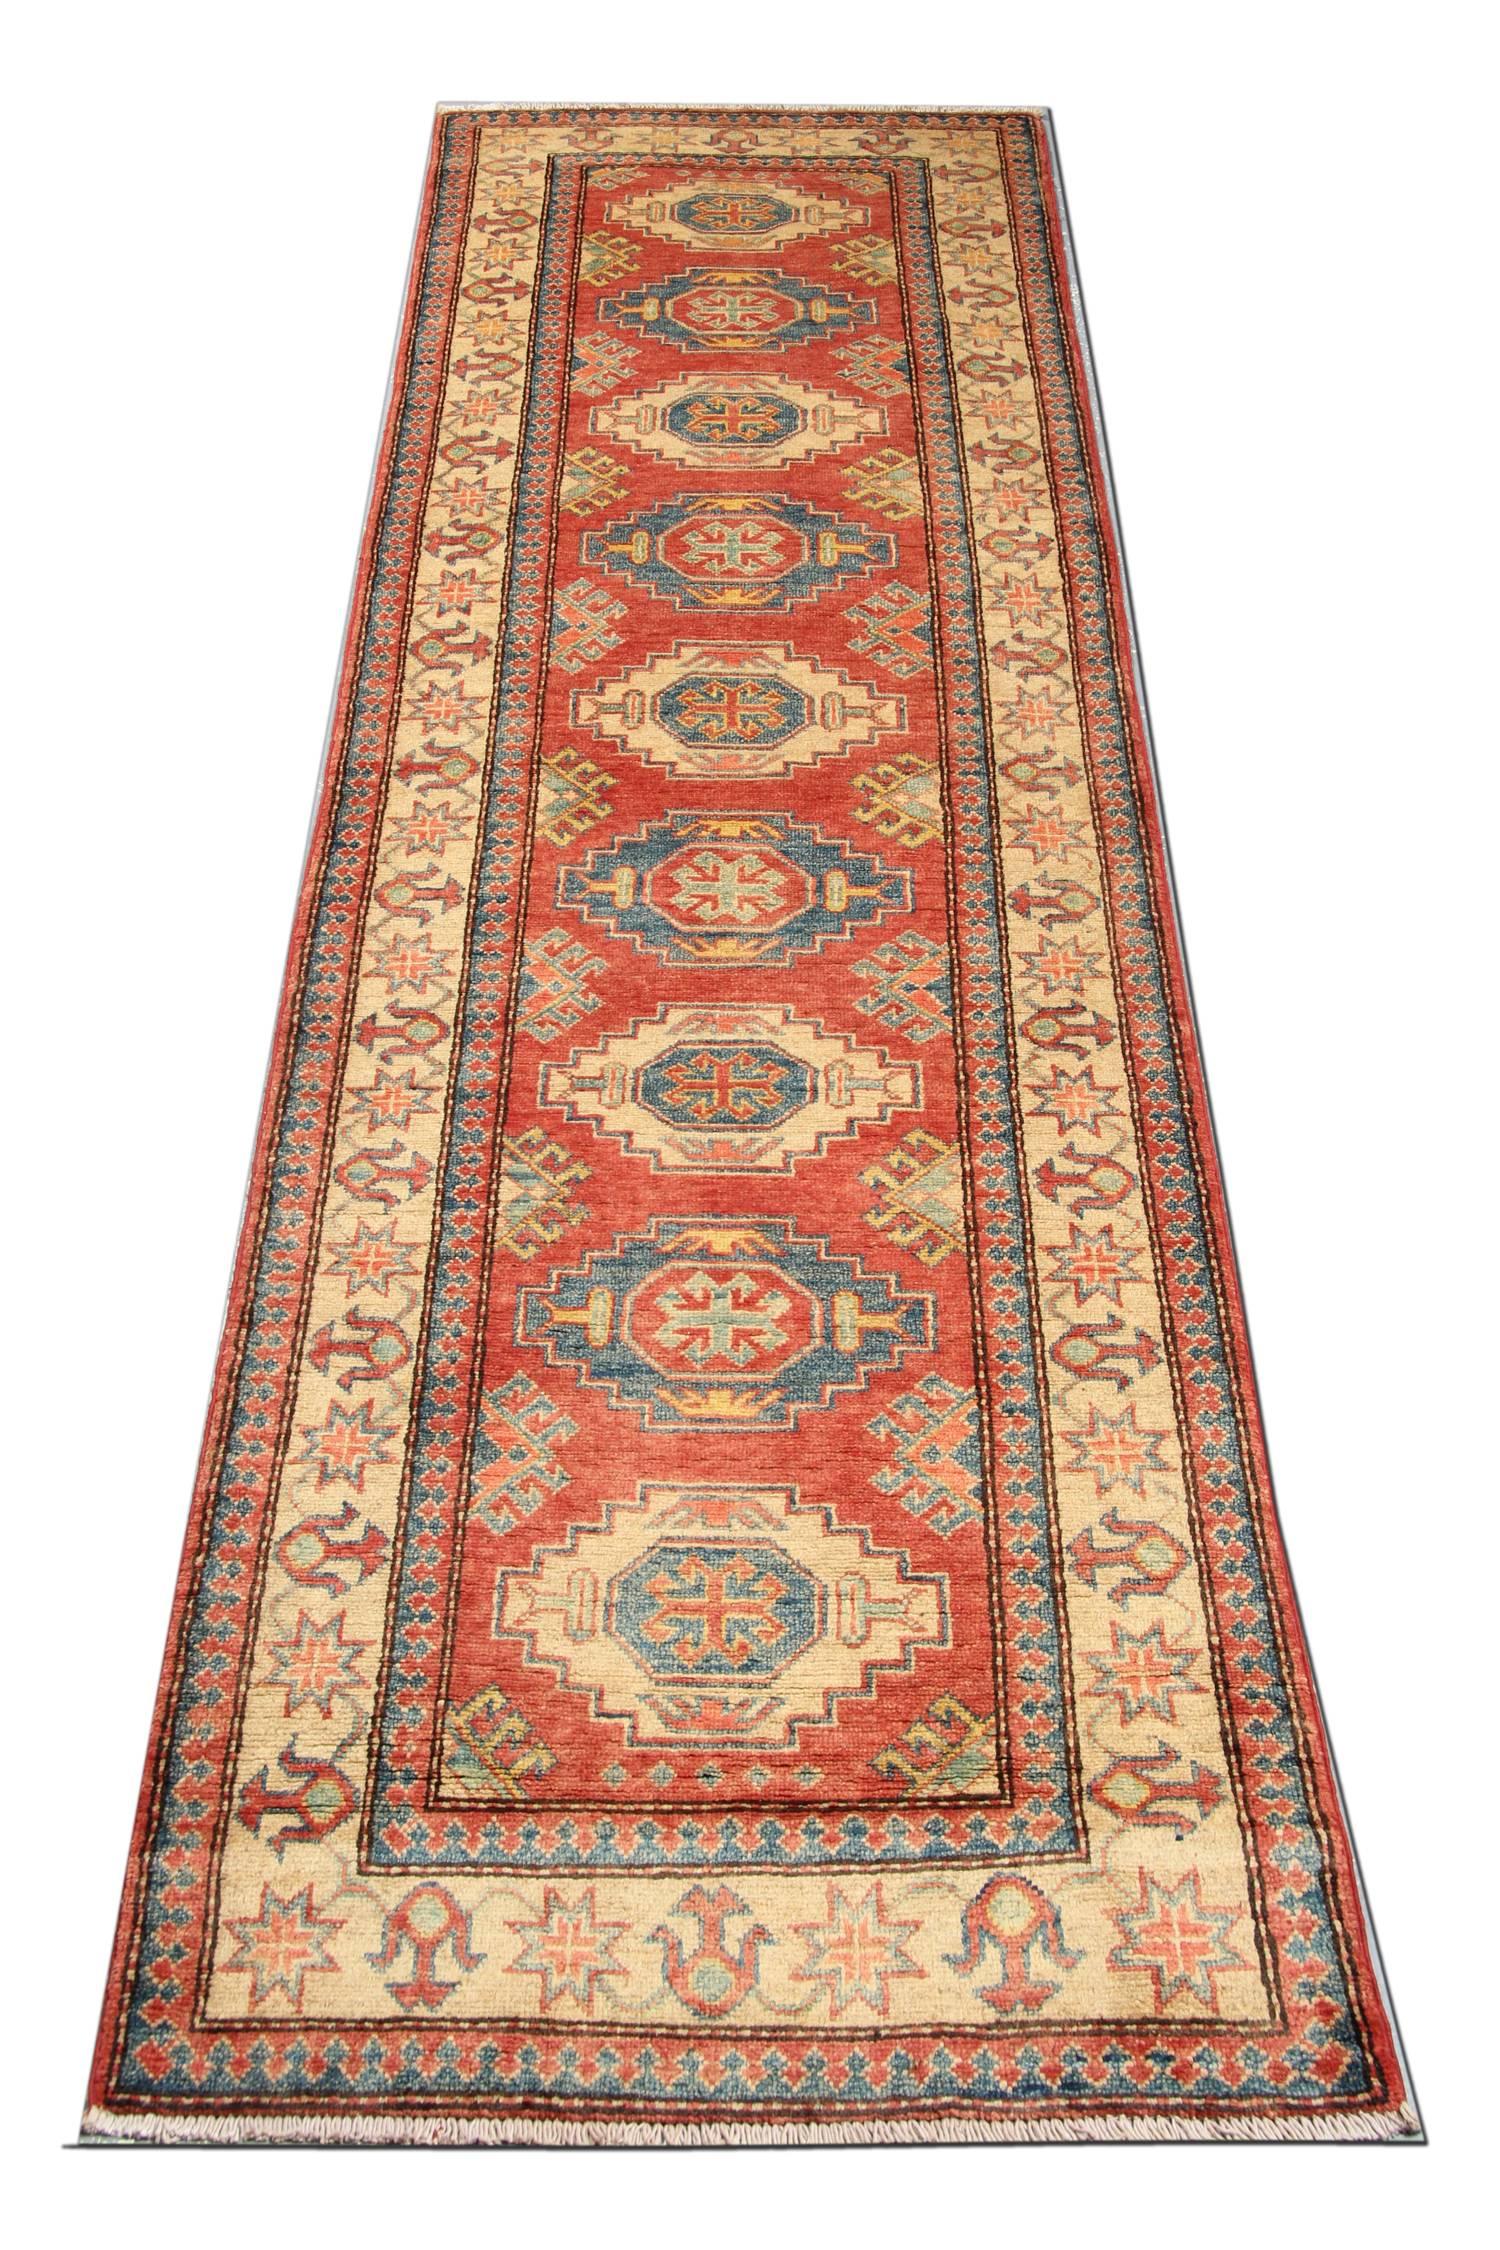 This is an example of a new traditional handwoven tribal rug. The geometric rug comes in a striking color combination. On this red rug we can see bright red, navy, light blue, sea blue, cream and caramel. The elegant creamy border of this woven rug